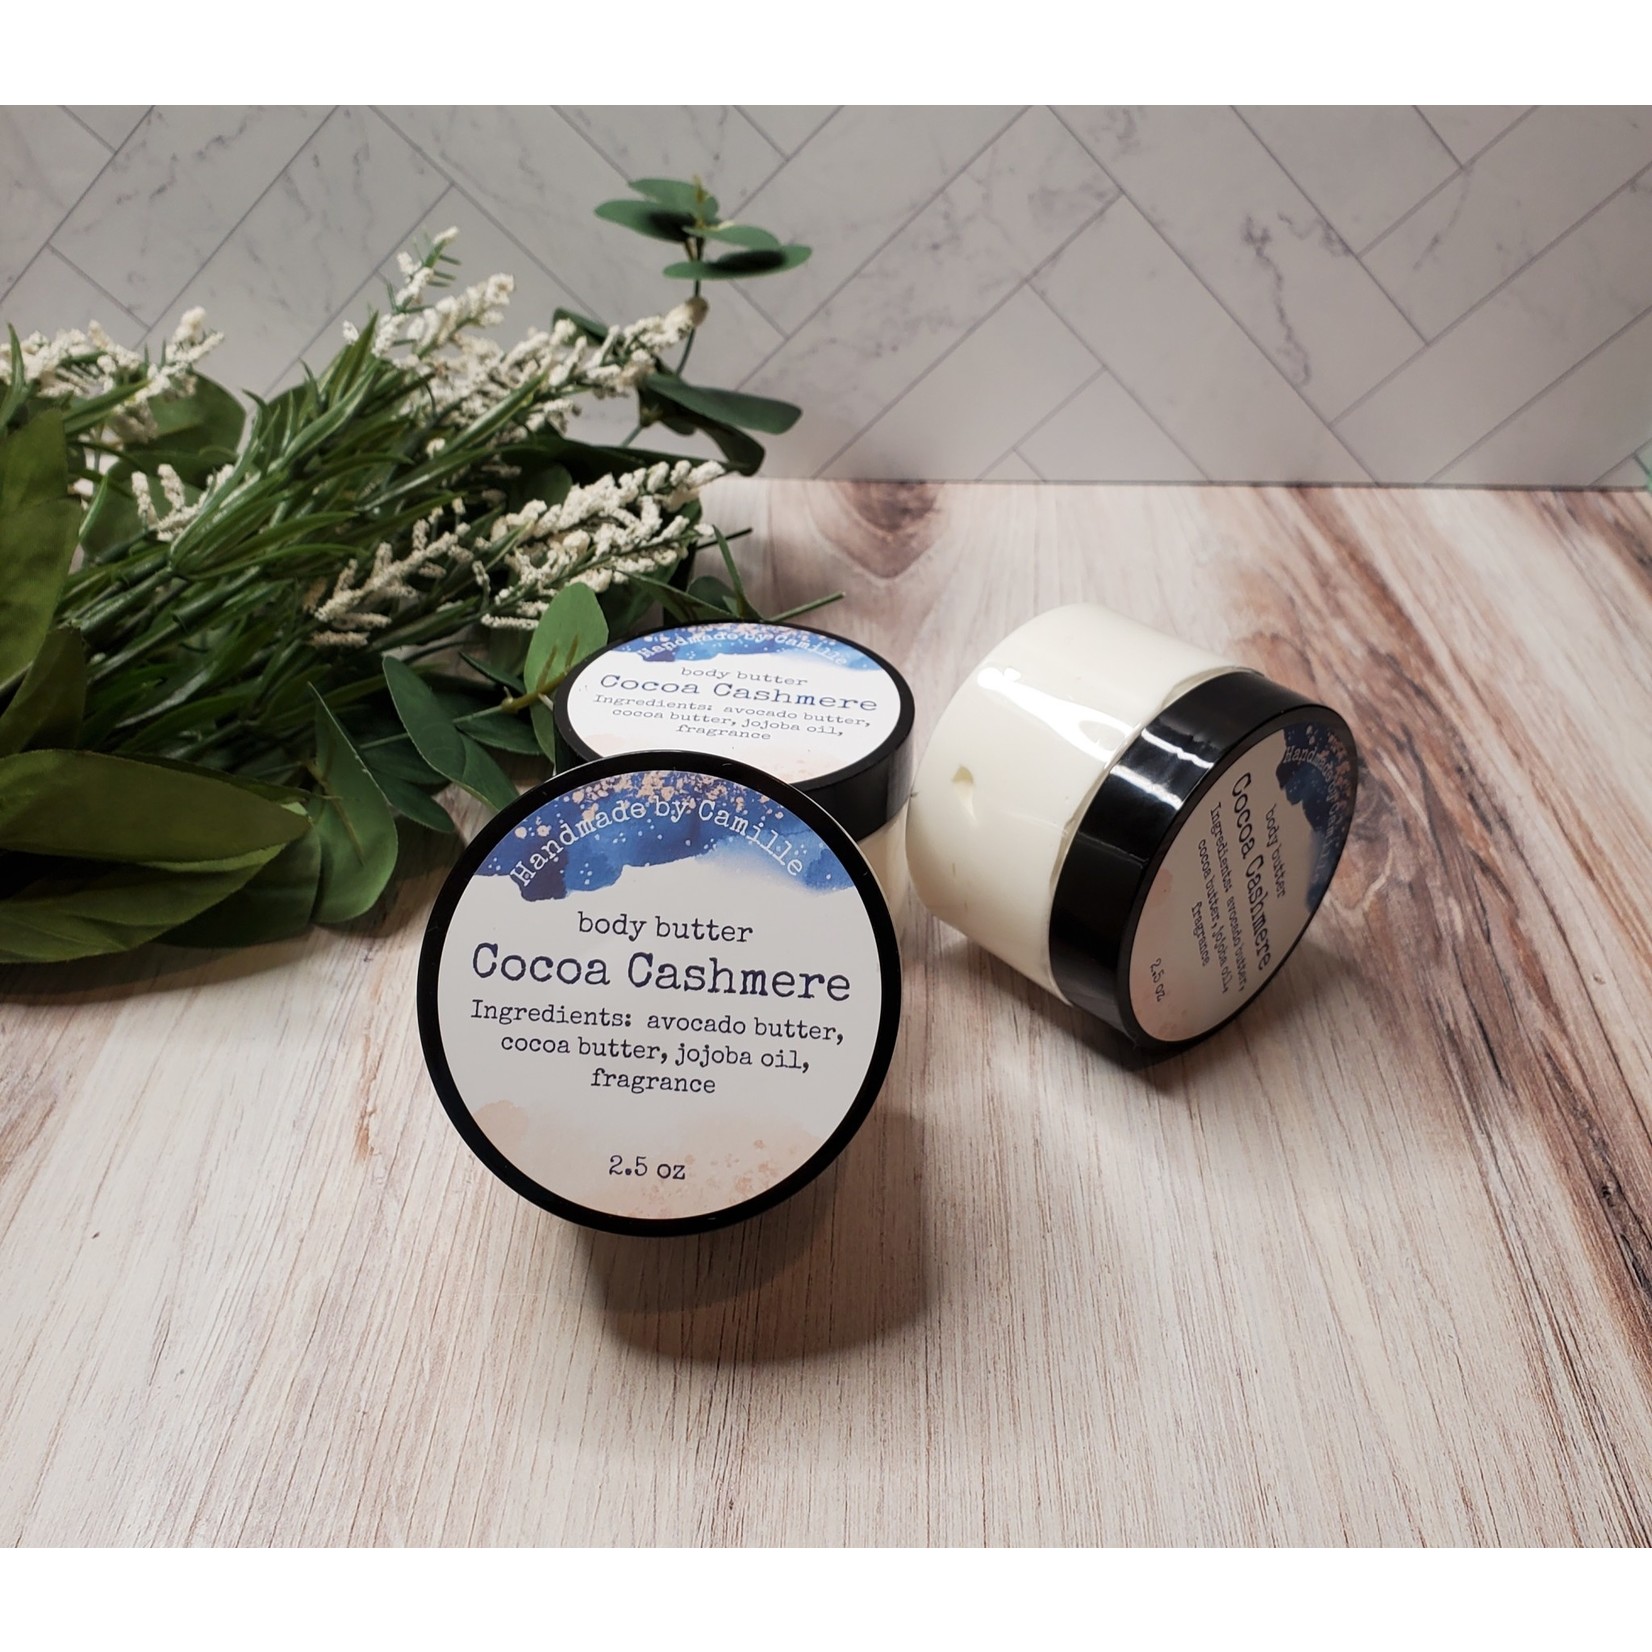 Handmade by Camille Body Butter - Cocoa Cashmere